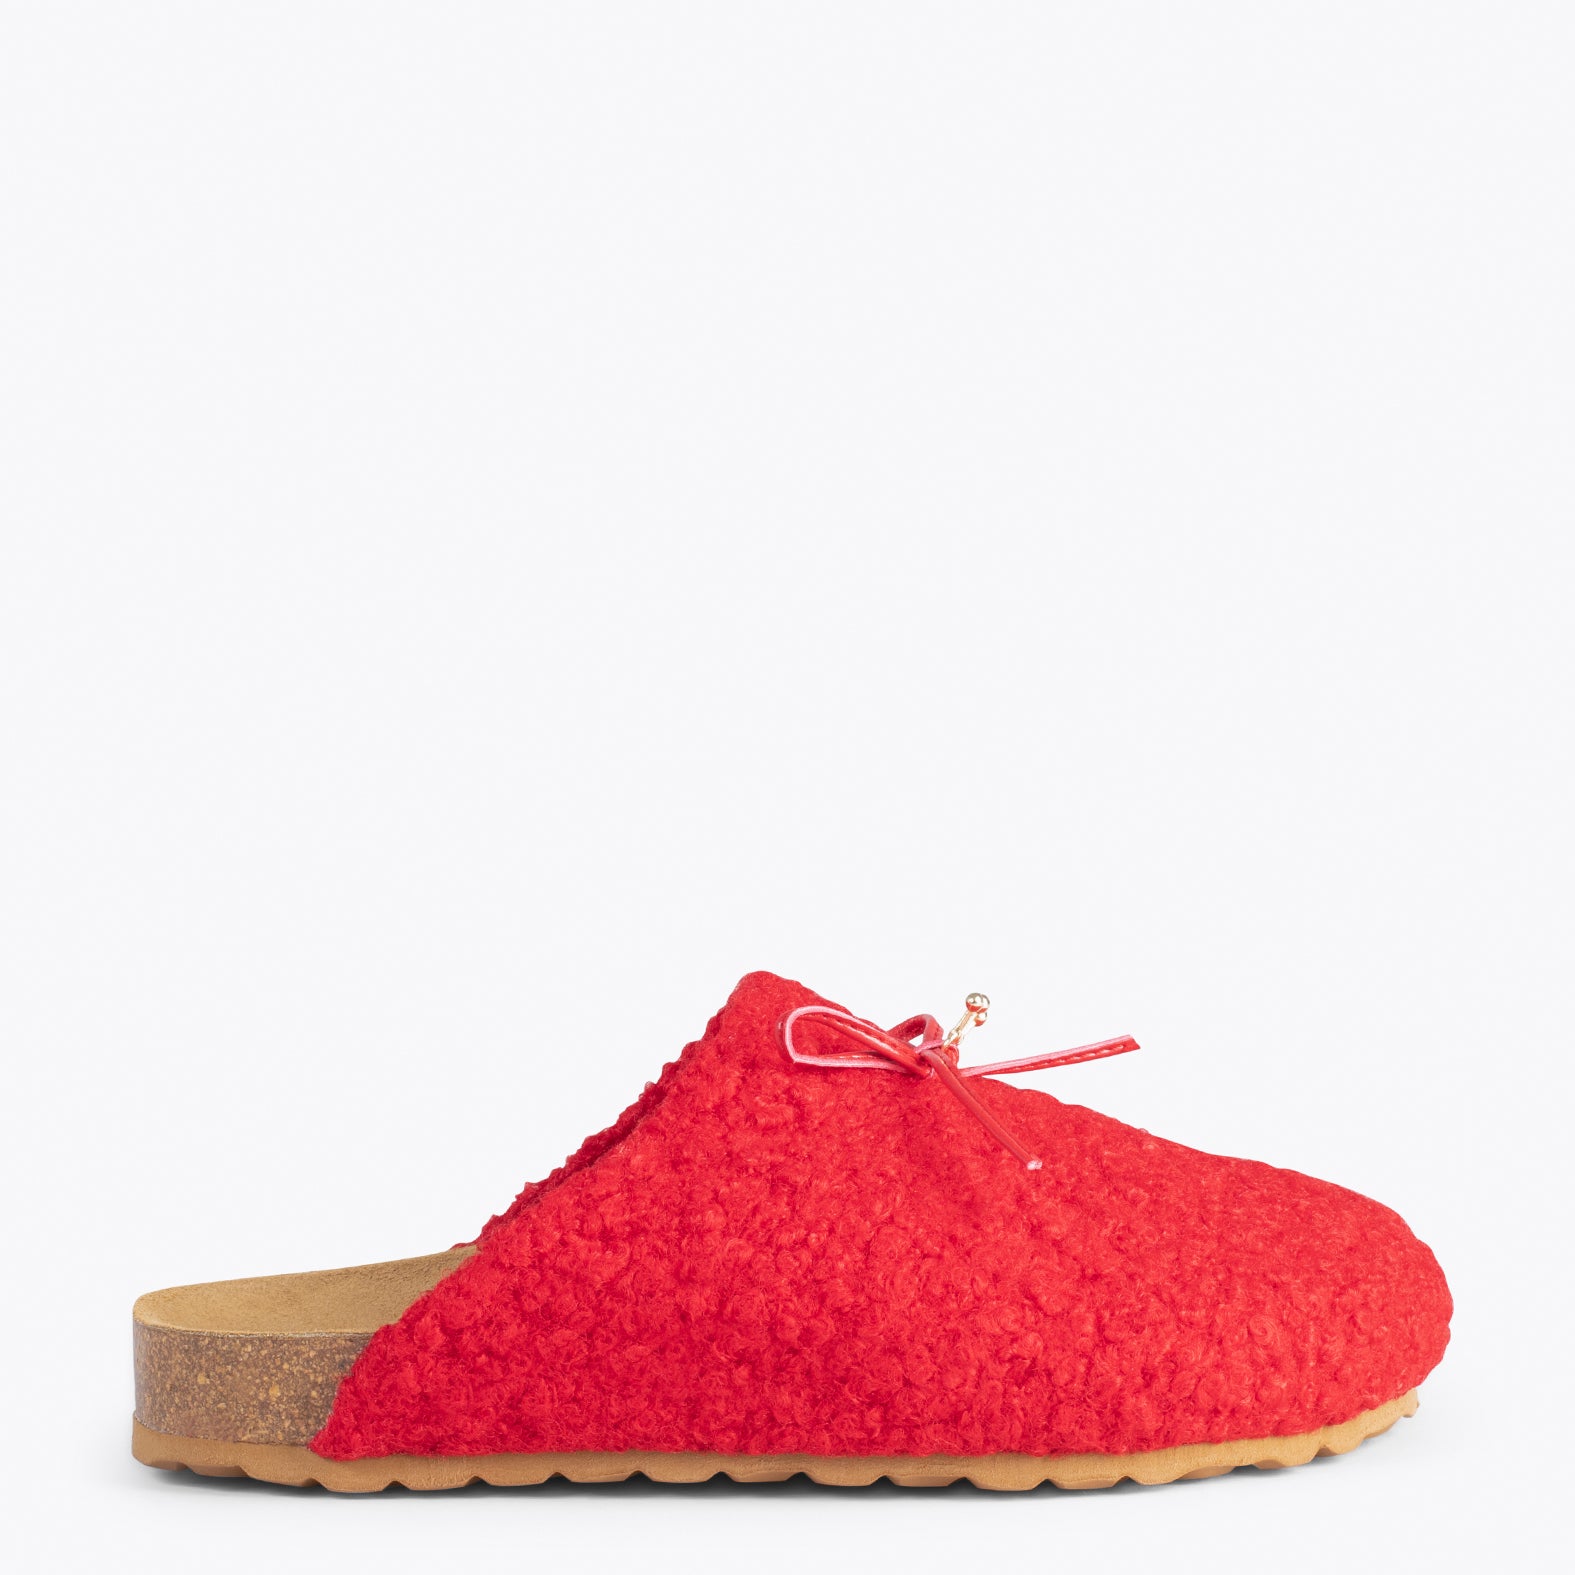 SWEET DREAMS – RED felt home slipper with ribbon